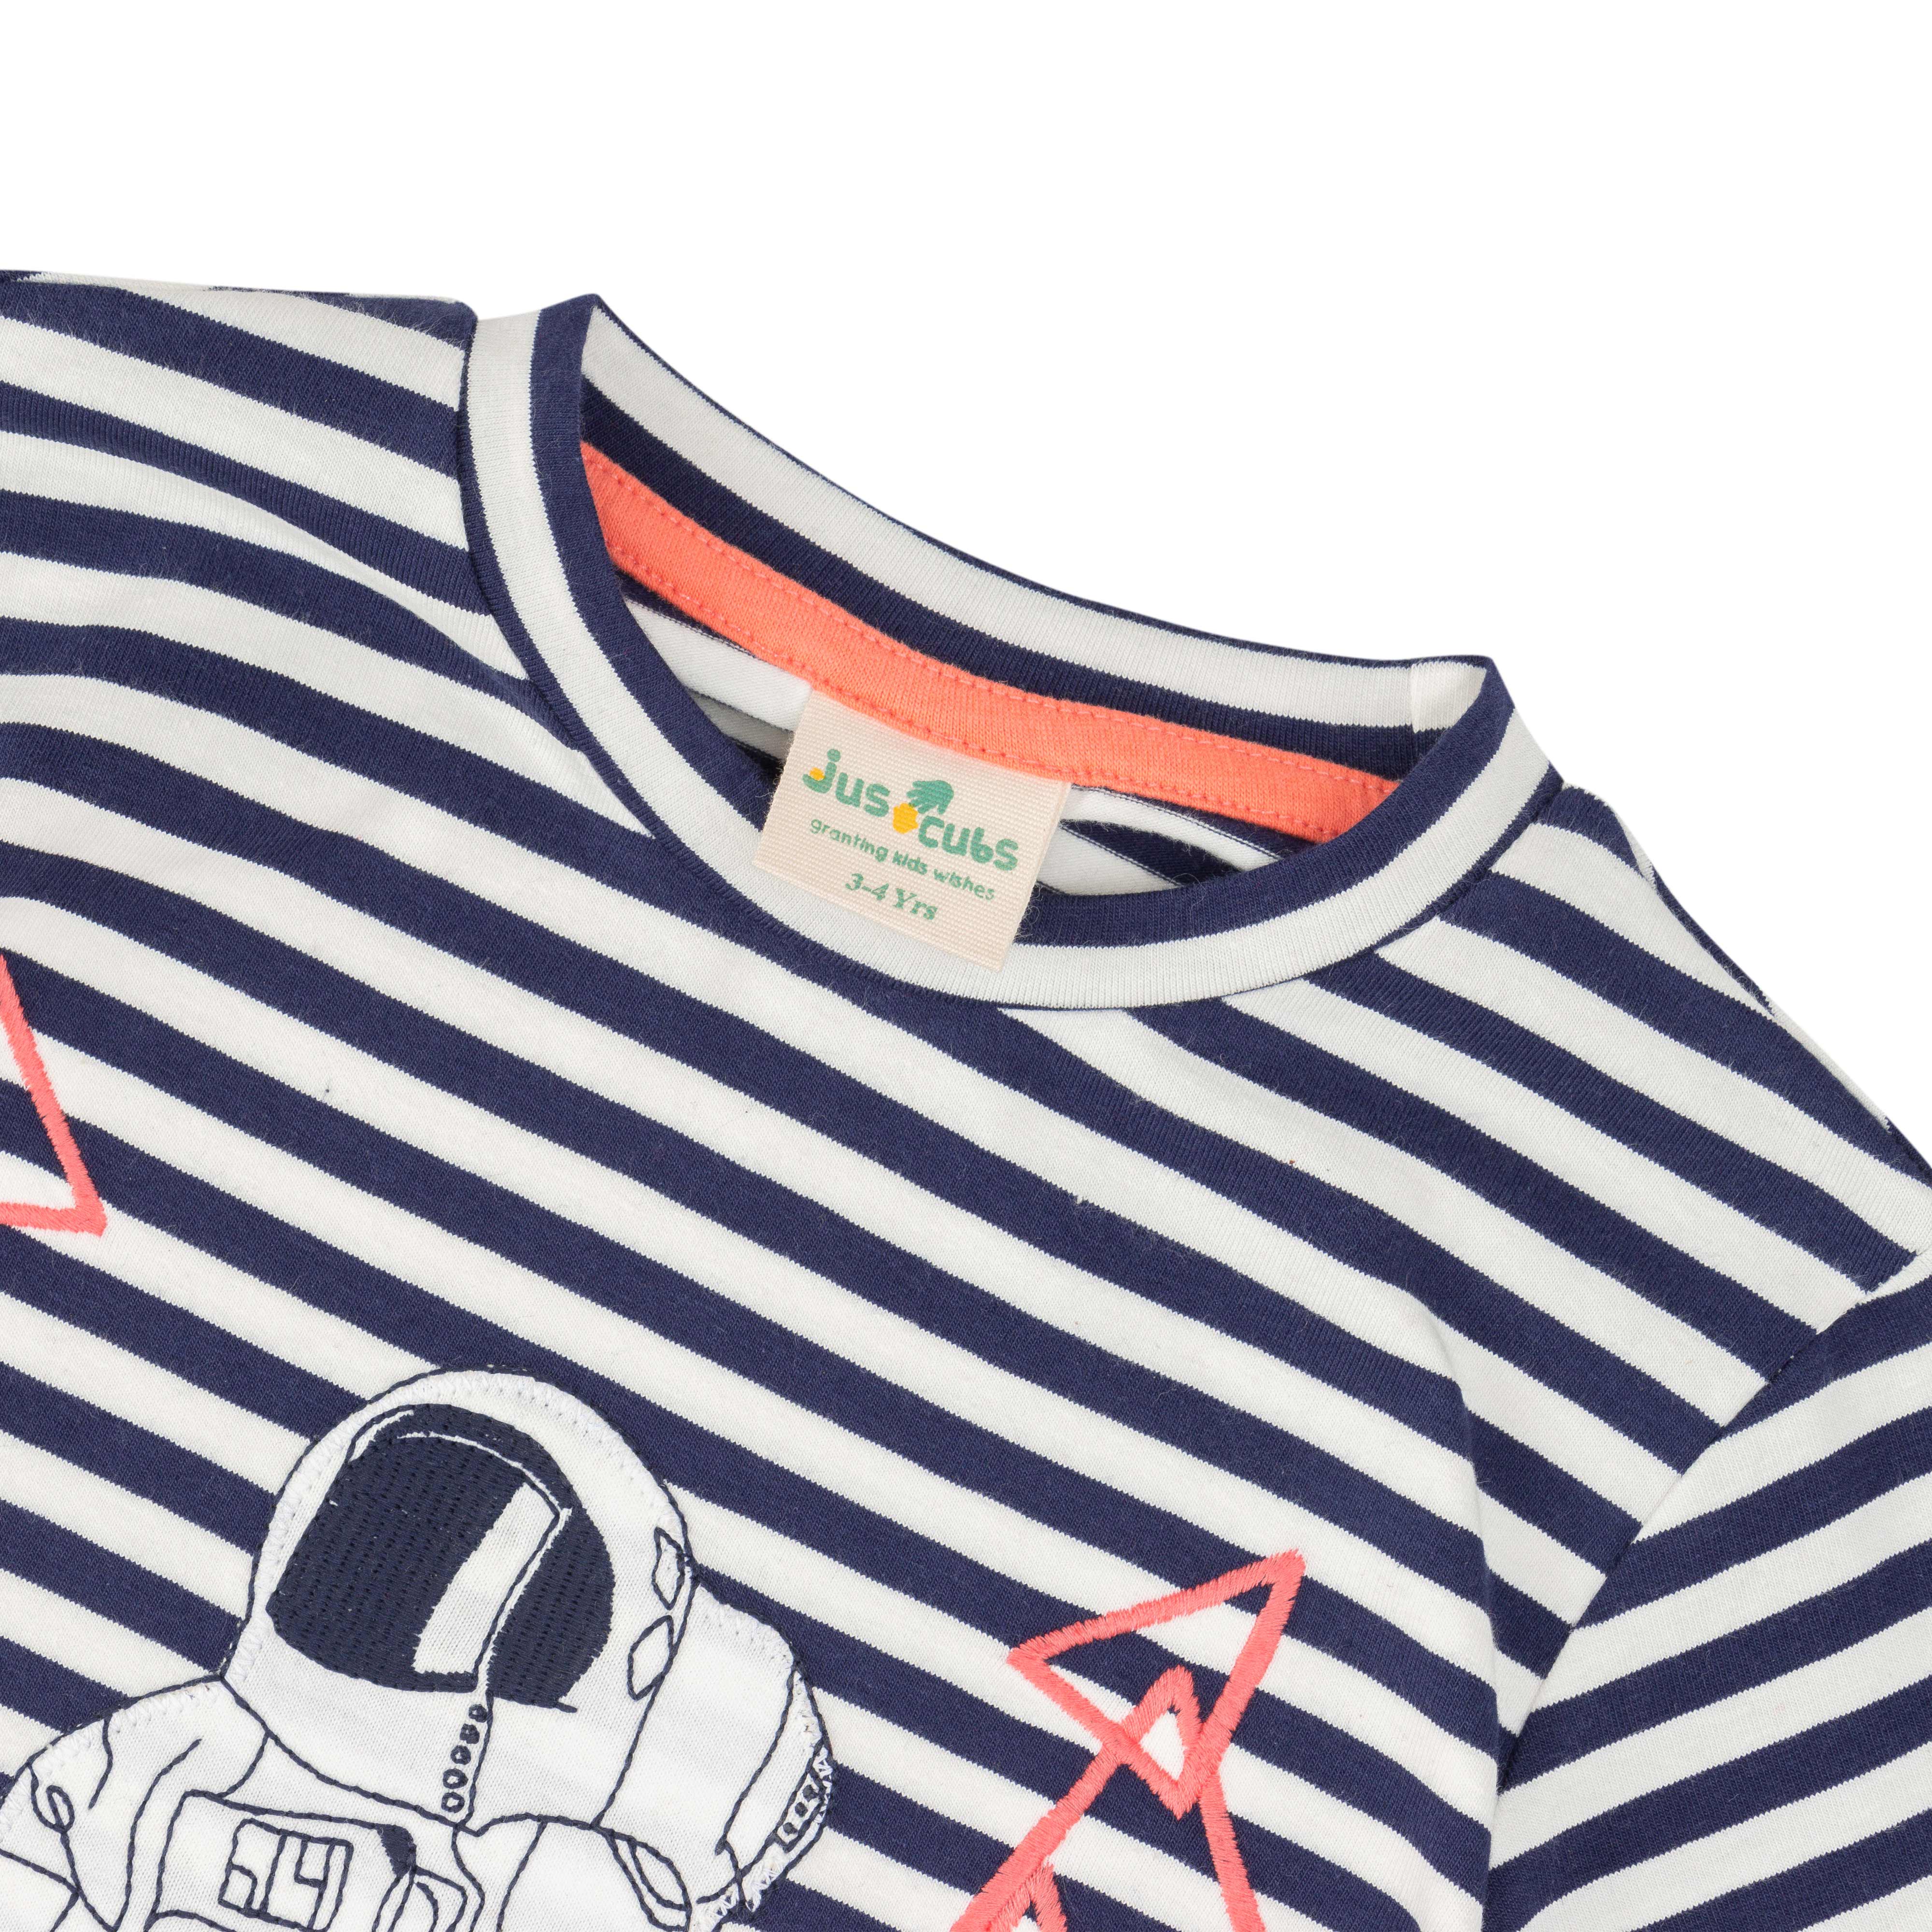 Baby Boys Striped  Graphic Printed Full Sleeve T Shirt